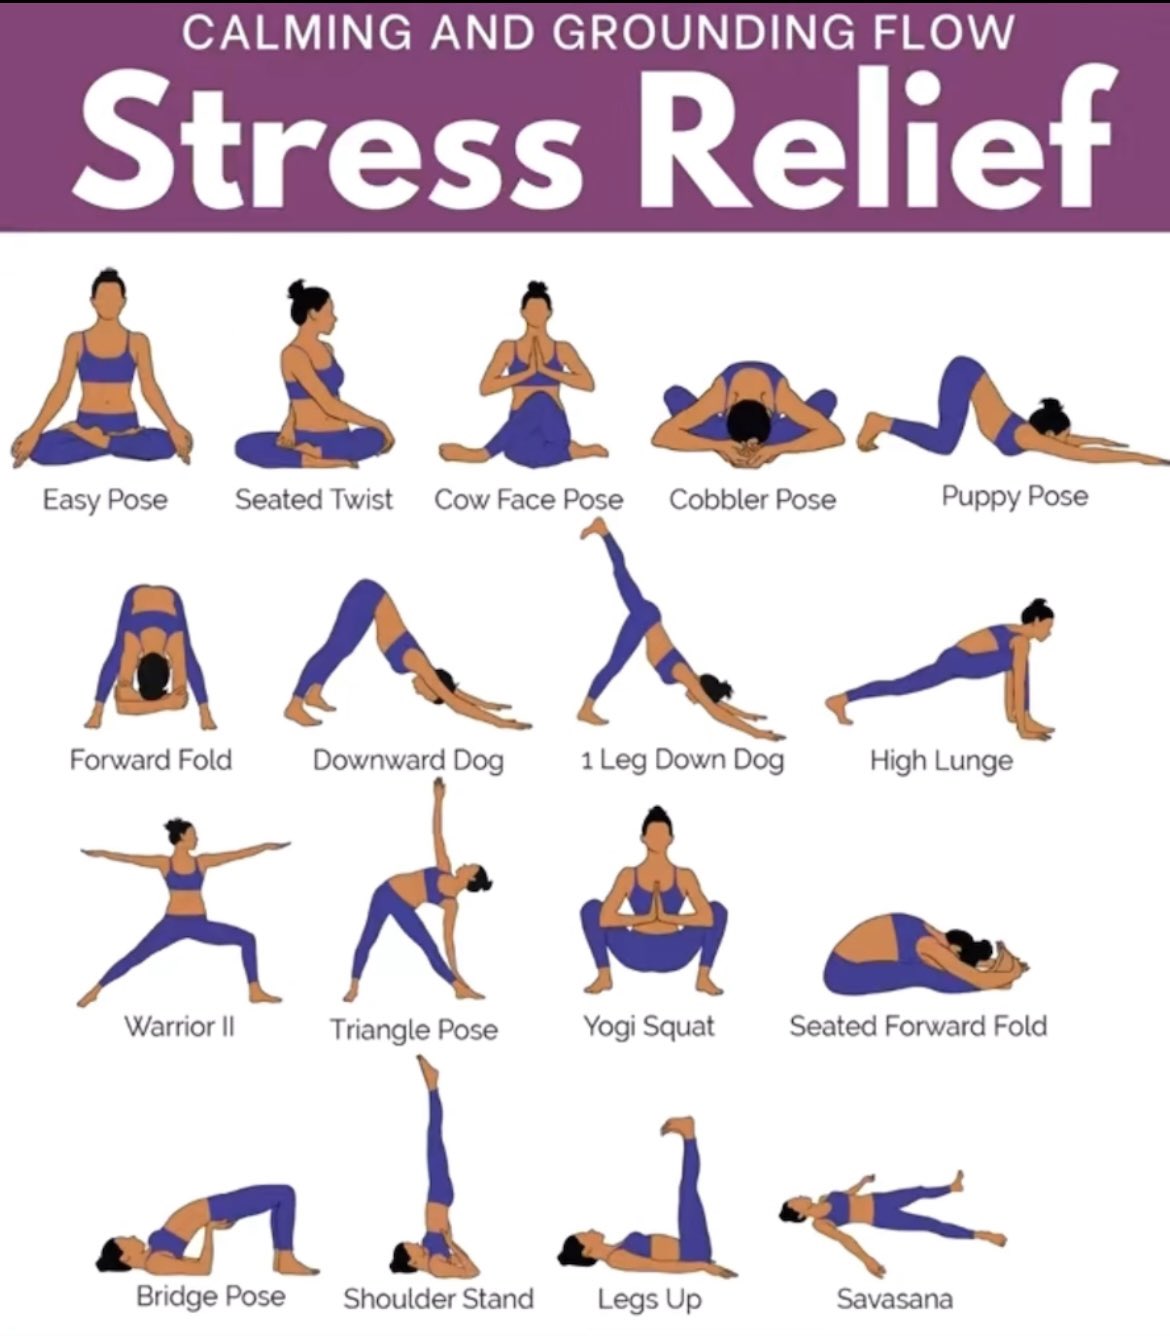 How Does Yoga Help in Stress Relief